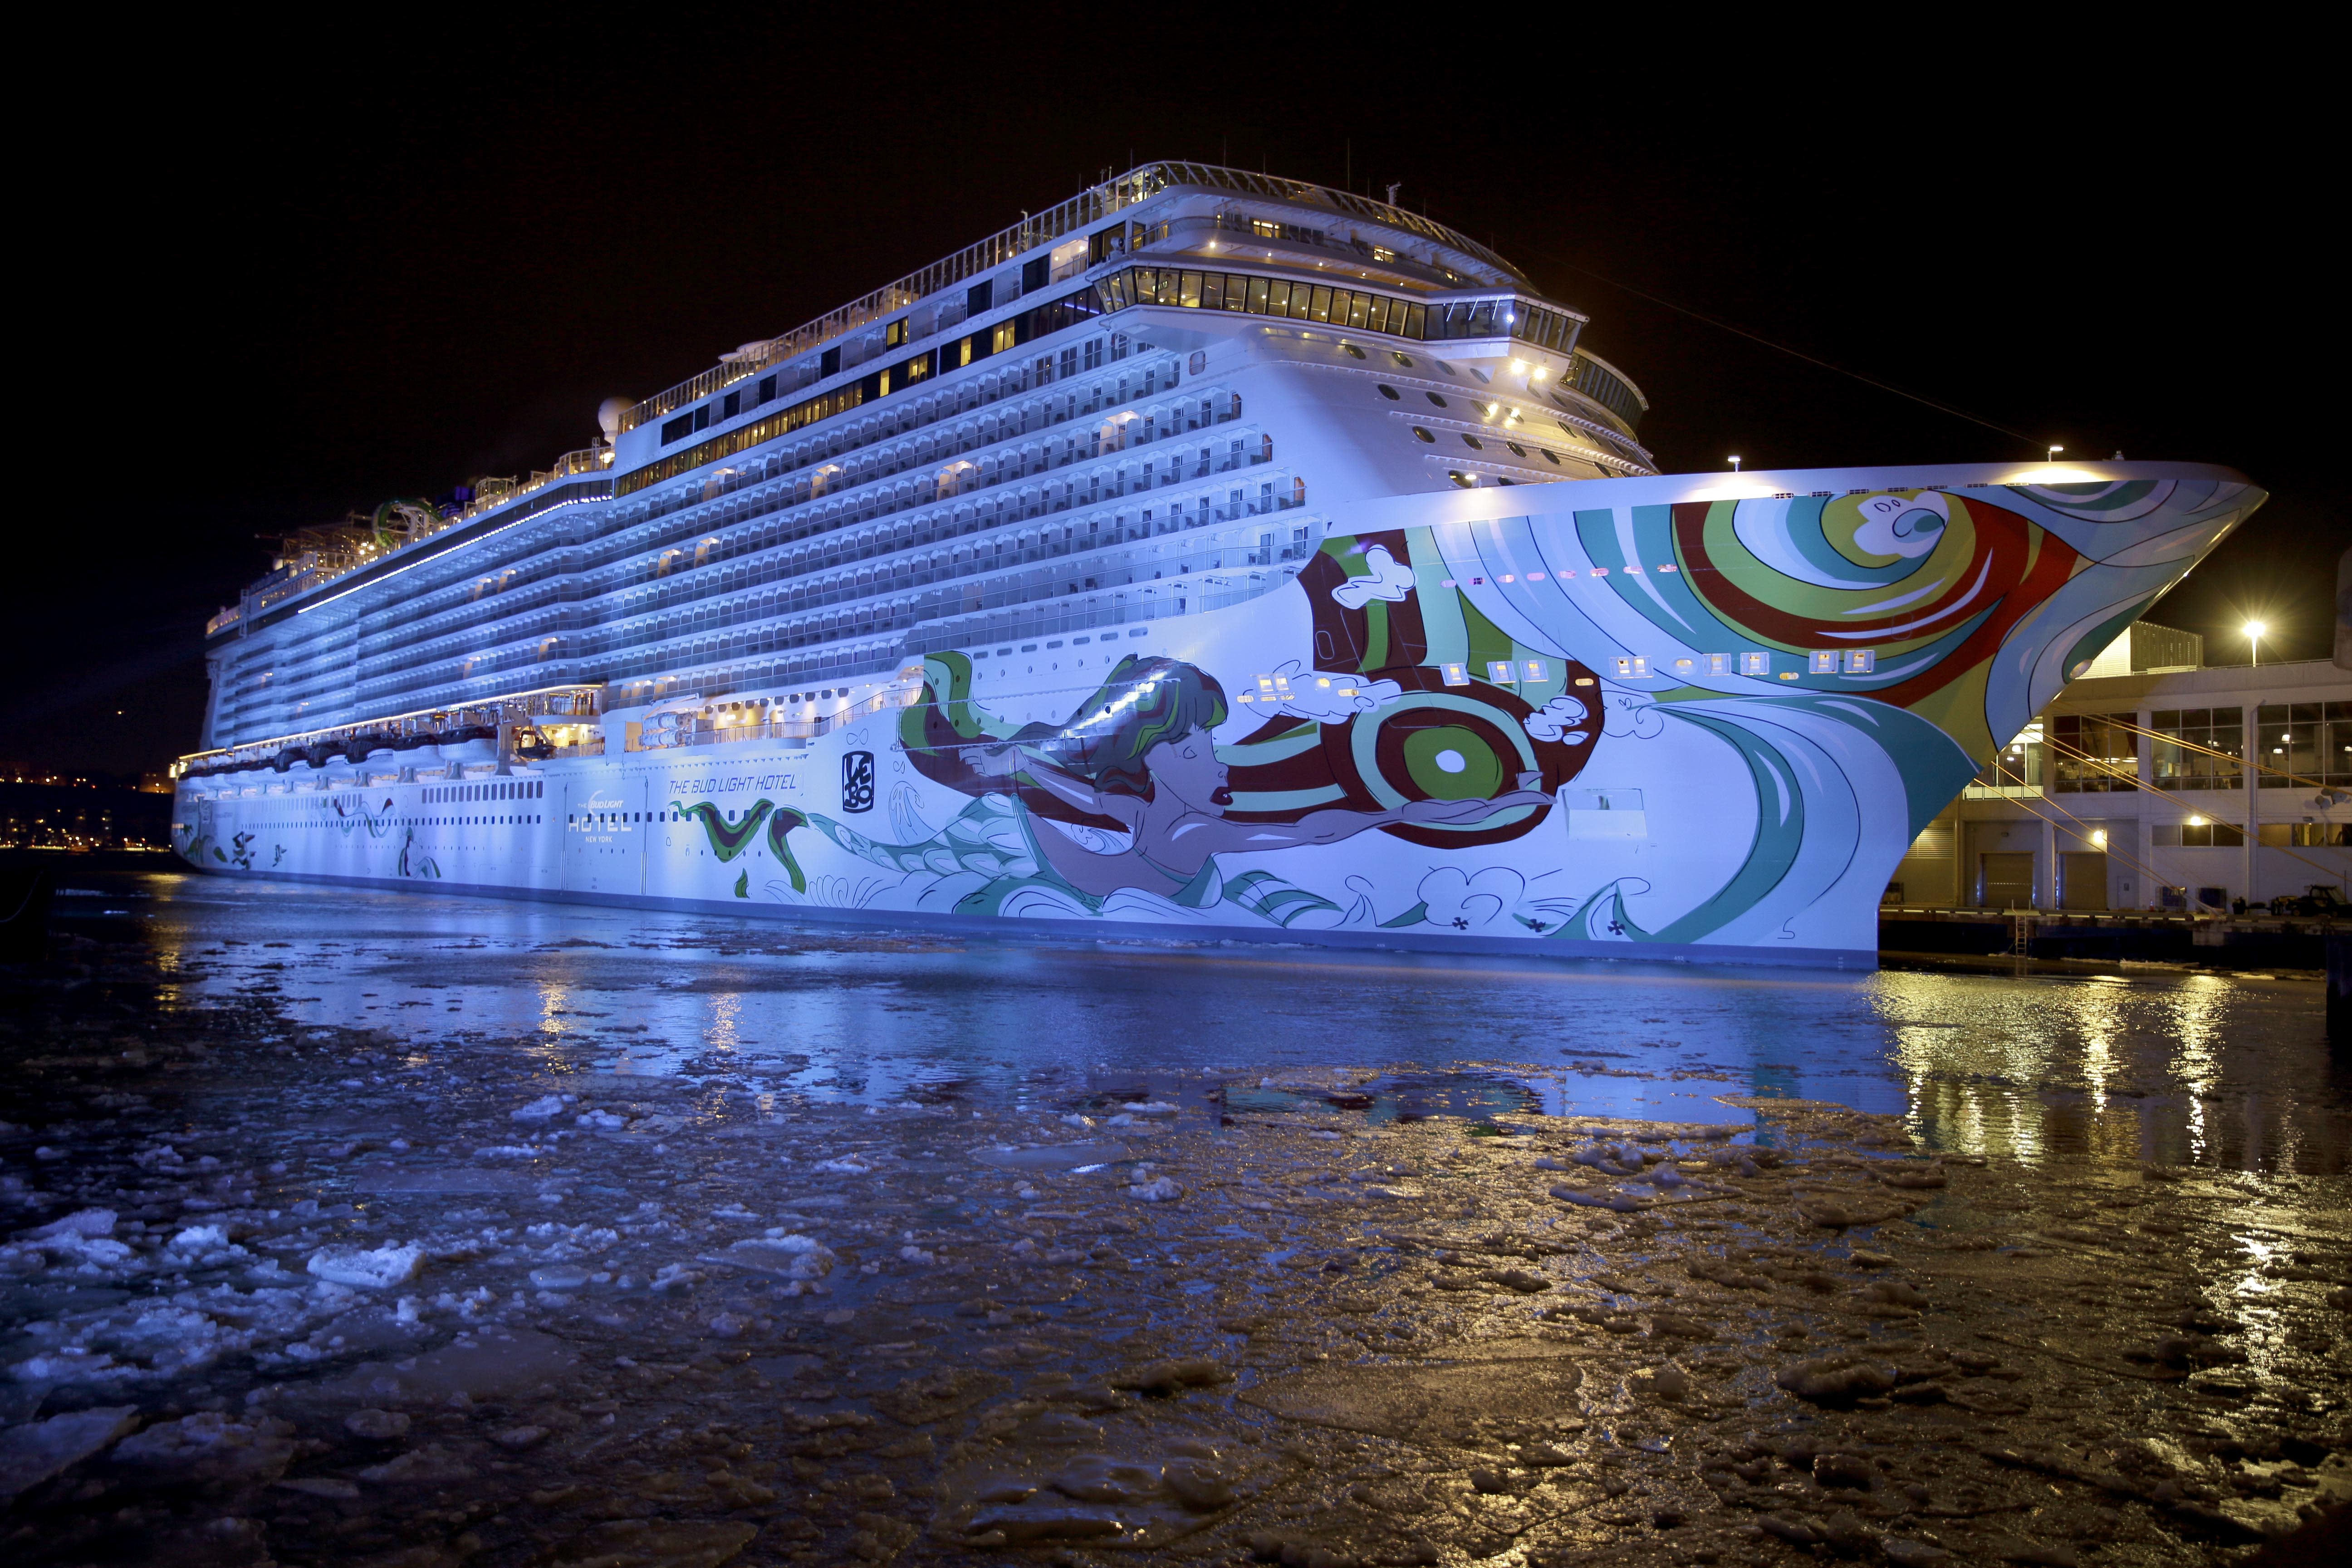 Cruise ship serving as Super Bowl floating hotel